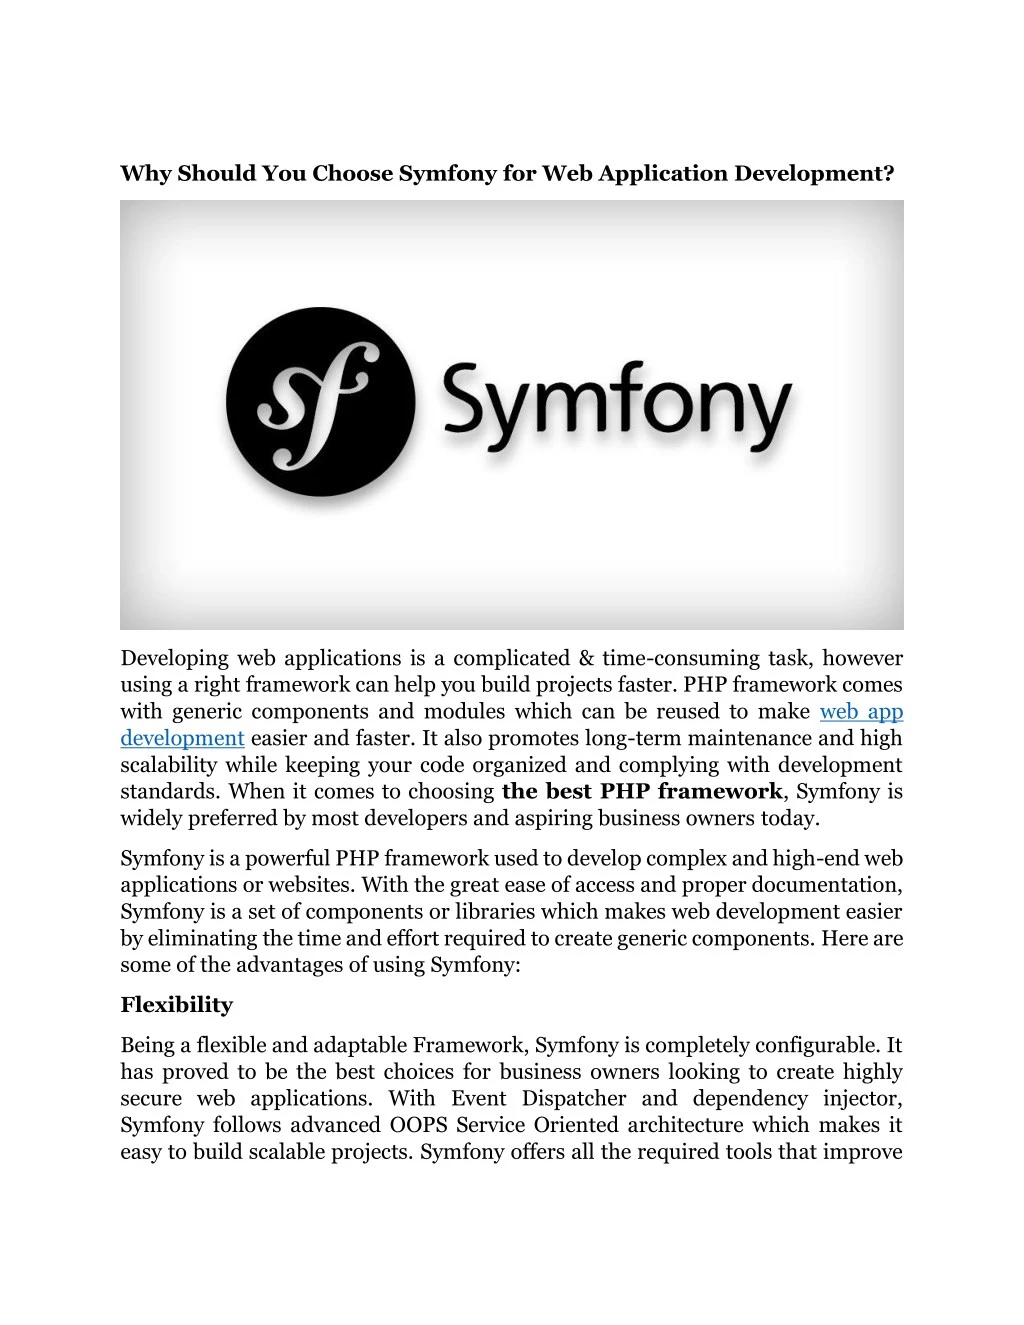 why should you choose symfony for web application